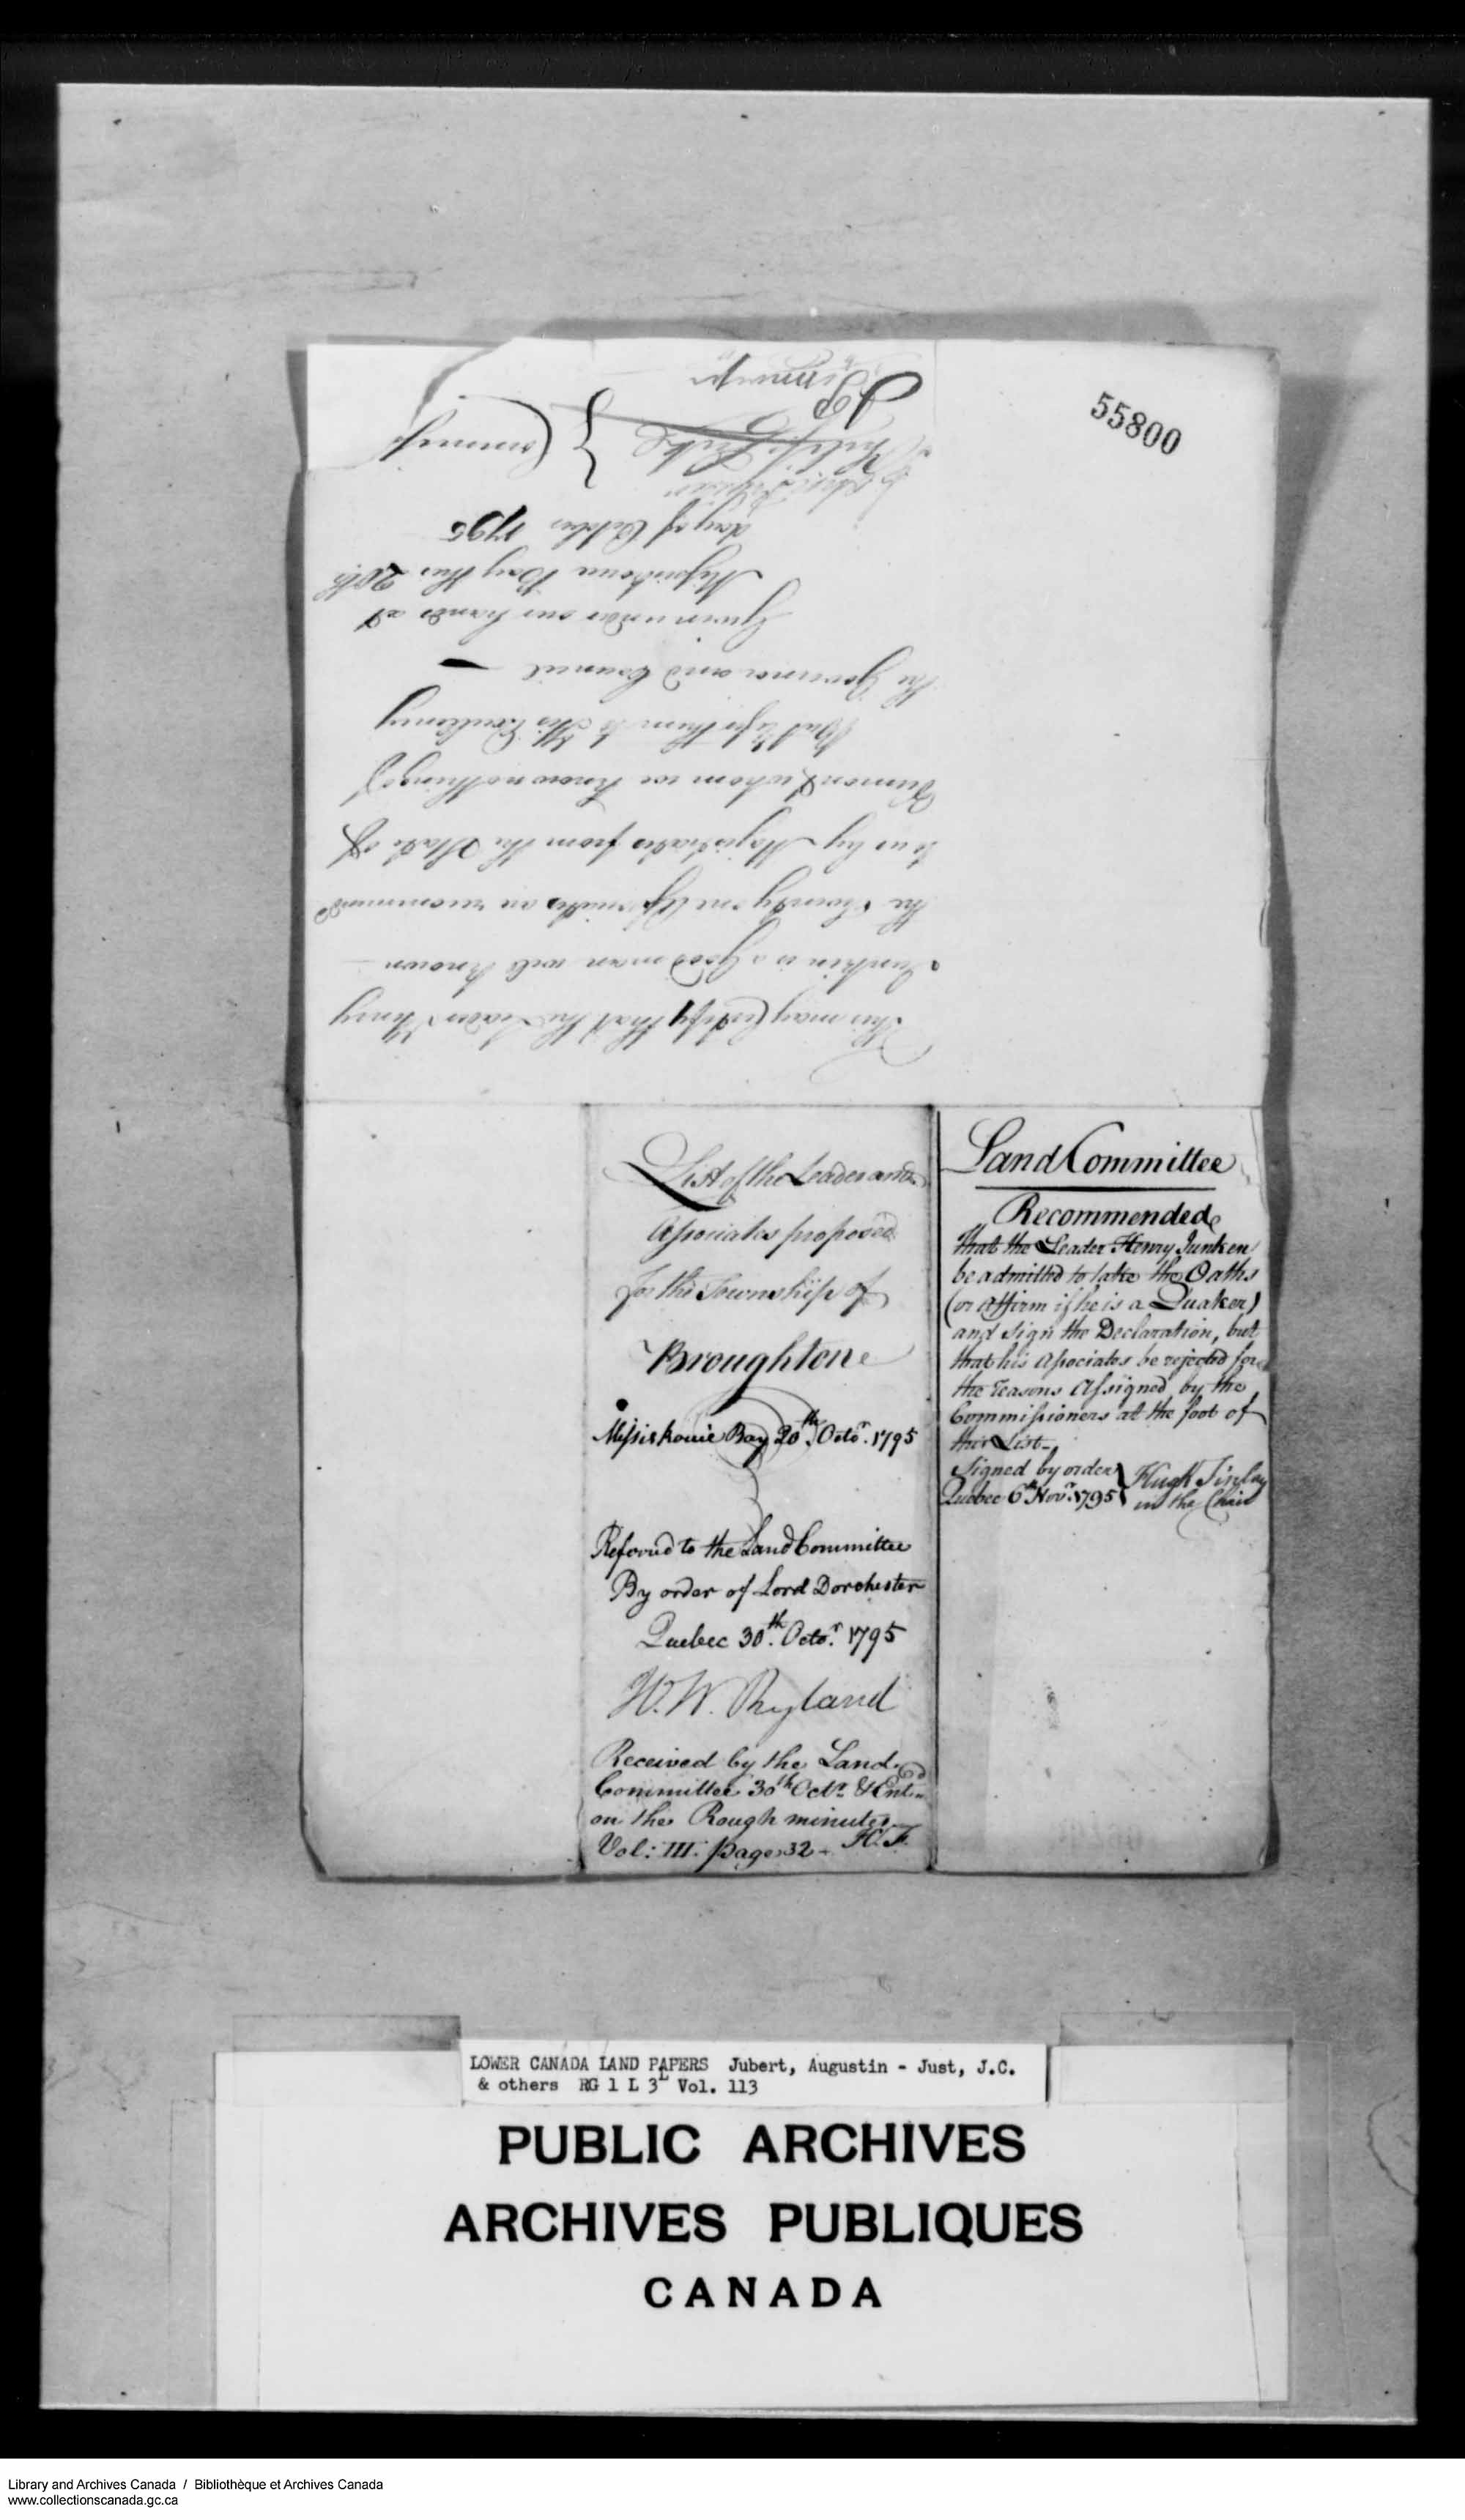 Digitized page of  for Image No.: e008700287